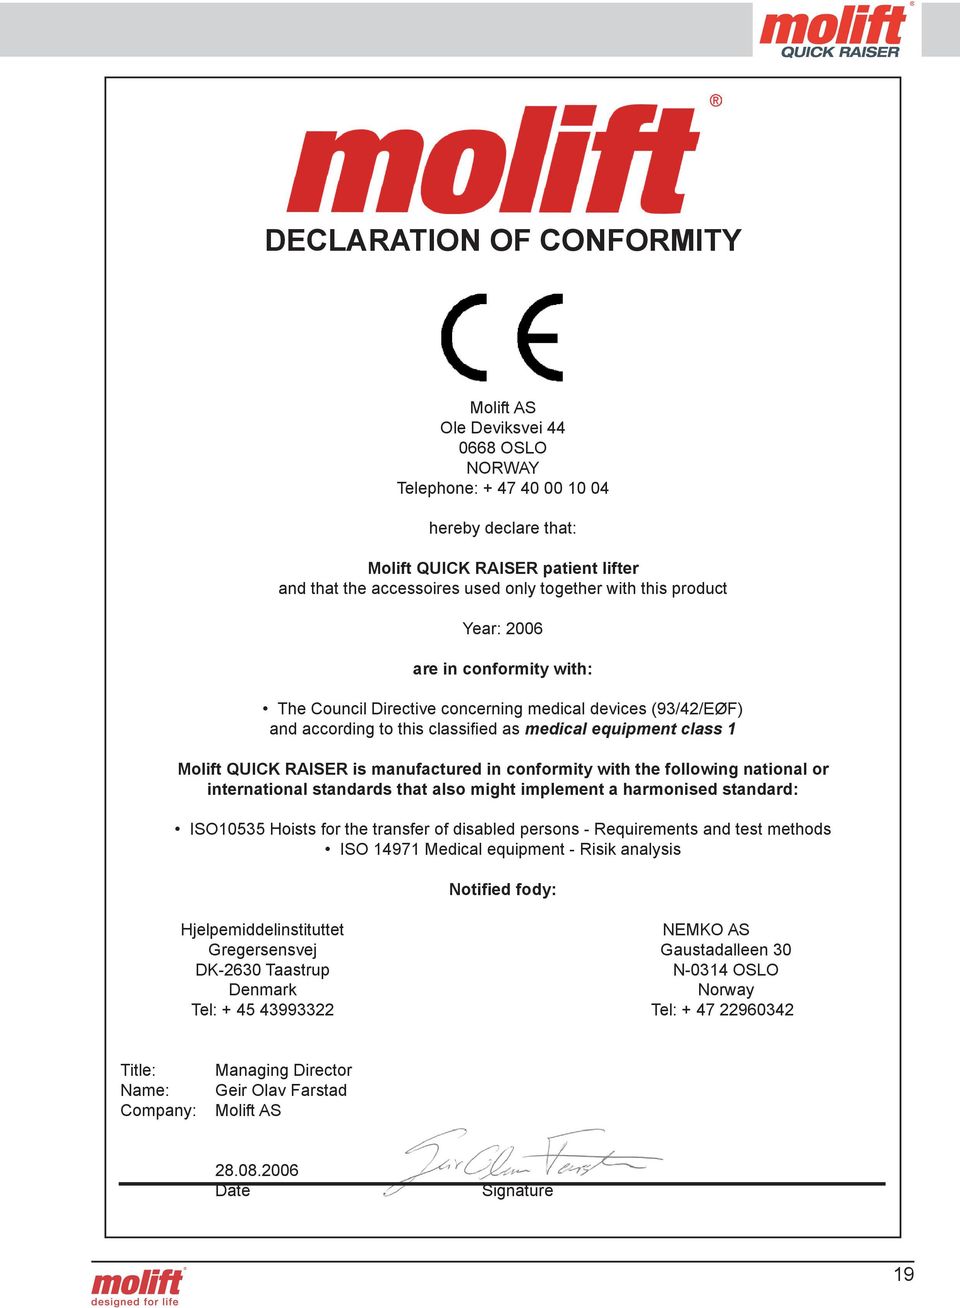 manufactured in conformity with the following national or international standards that also might implement a harmonised standard: ISO10535 Hoists for the transfer of disabled persons - Requirements